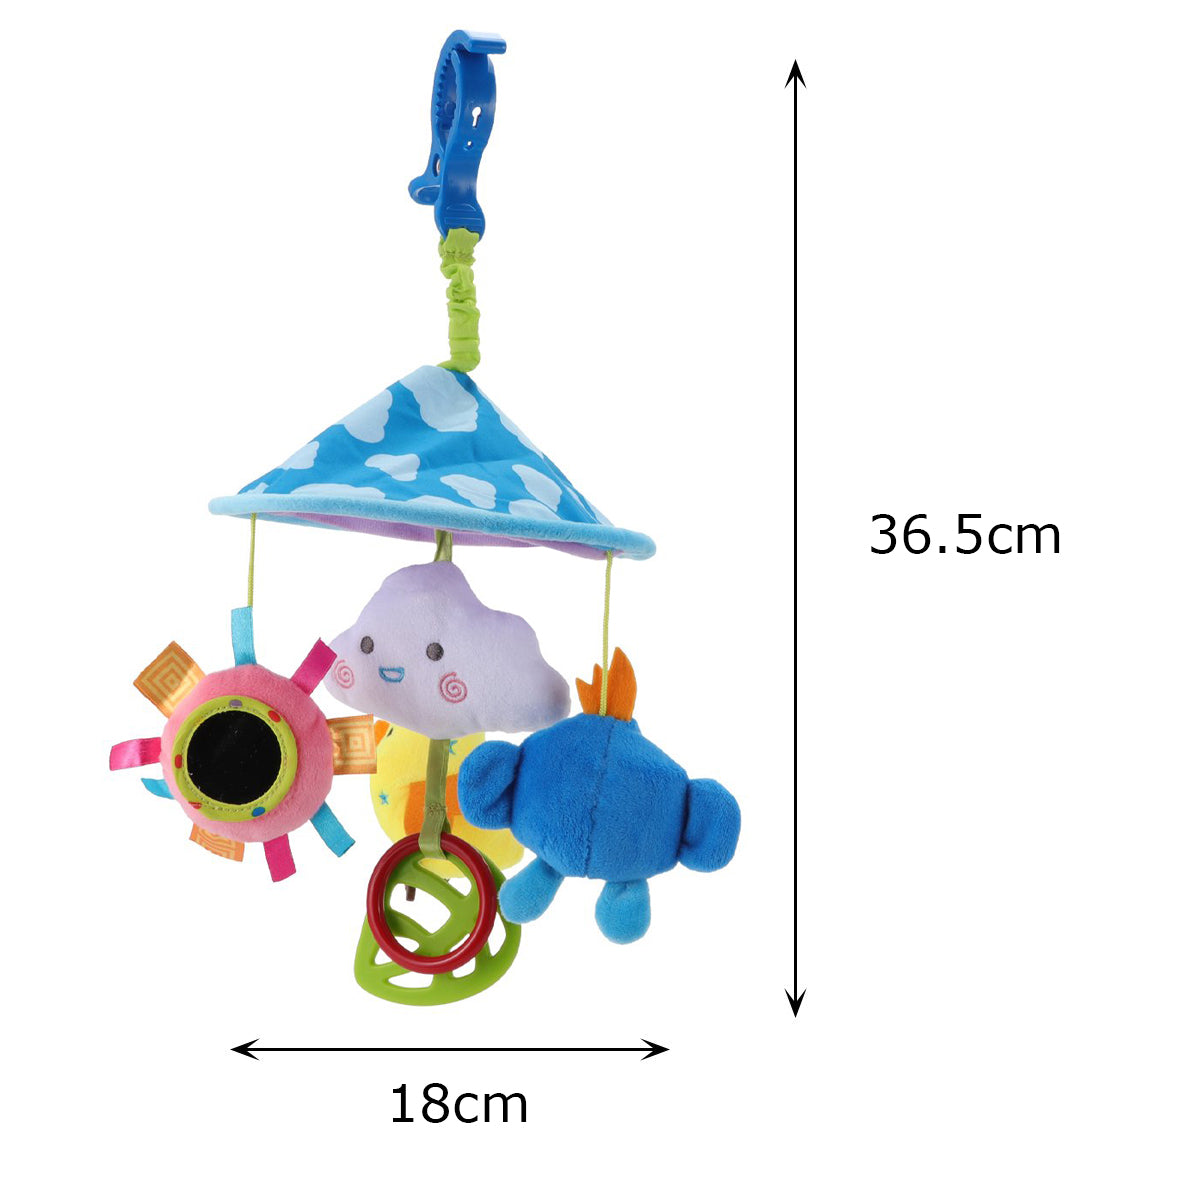 Bird In The Sky Bed Hanging Rattle Toy Rotating Cot Mobile - Blue - Baby Moo